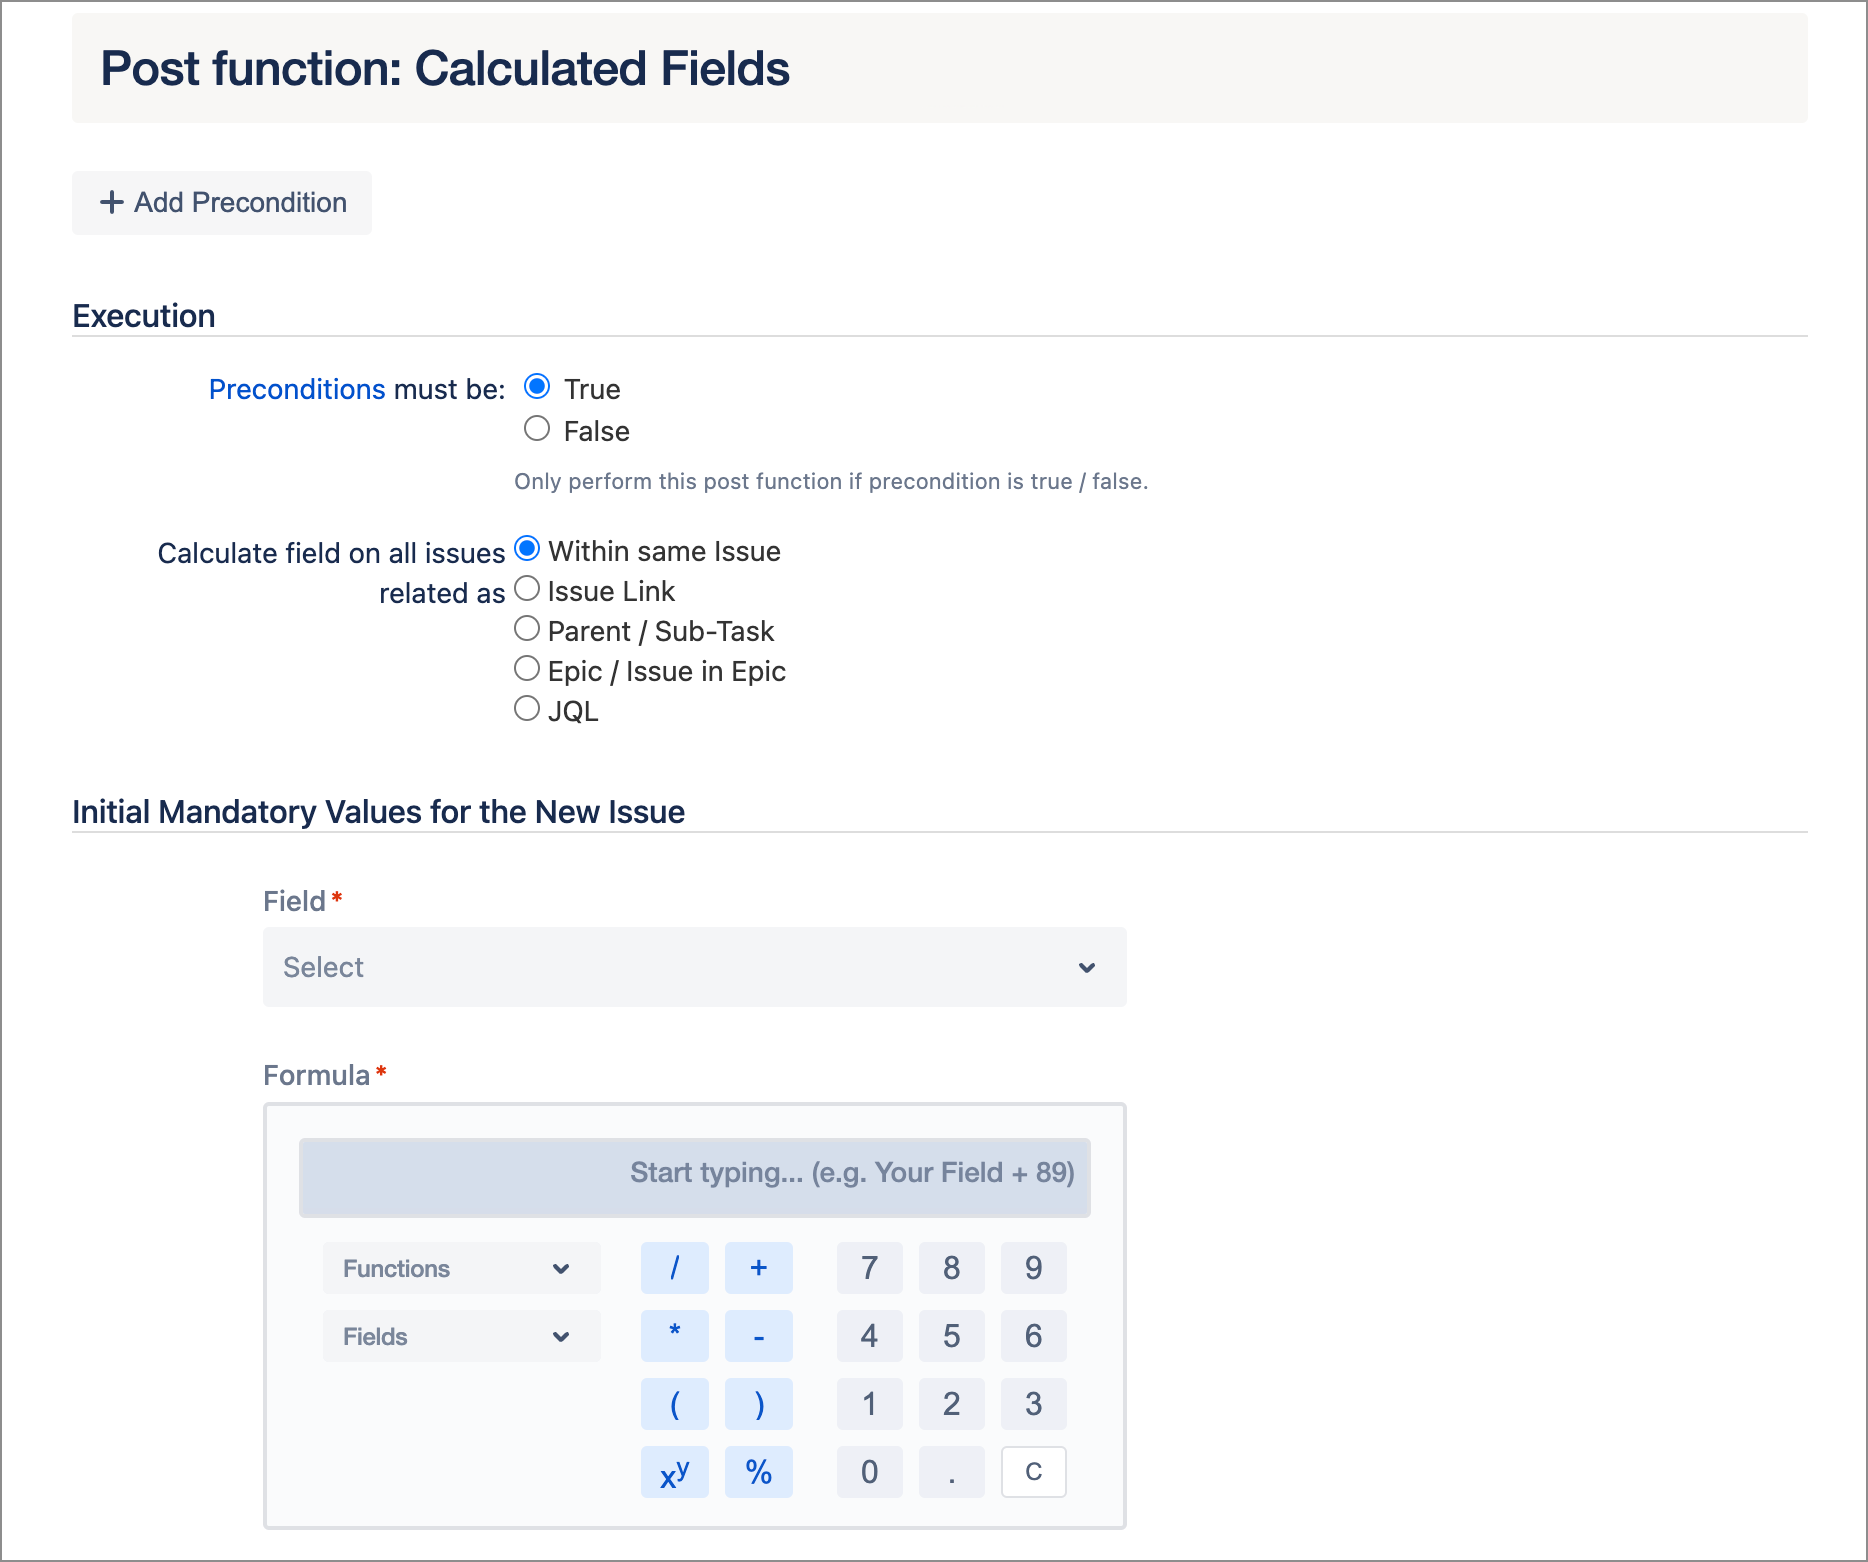 Screenshot of the Calculated Fields post function configuration options.